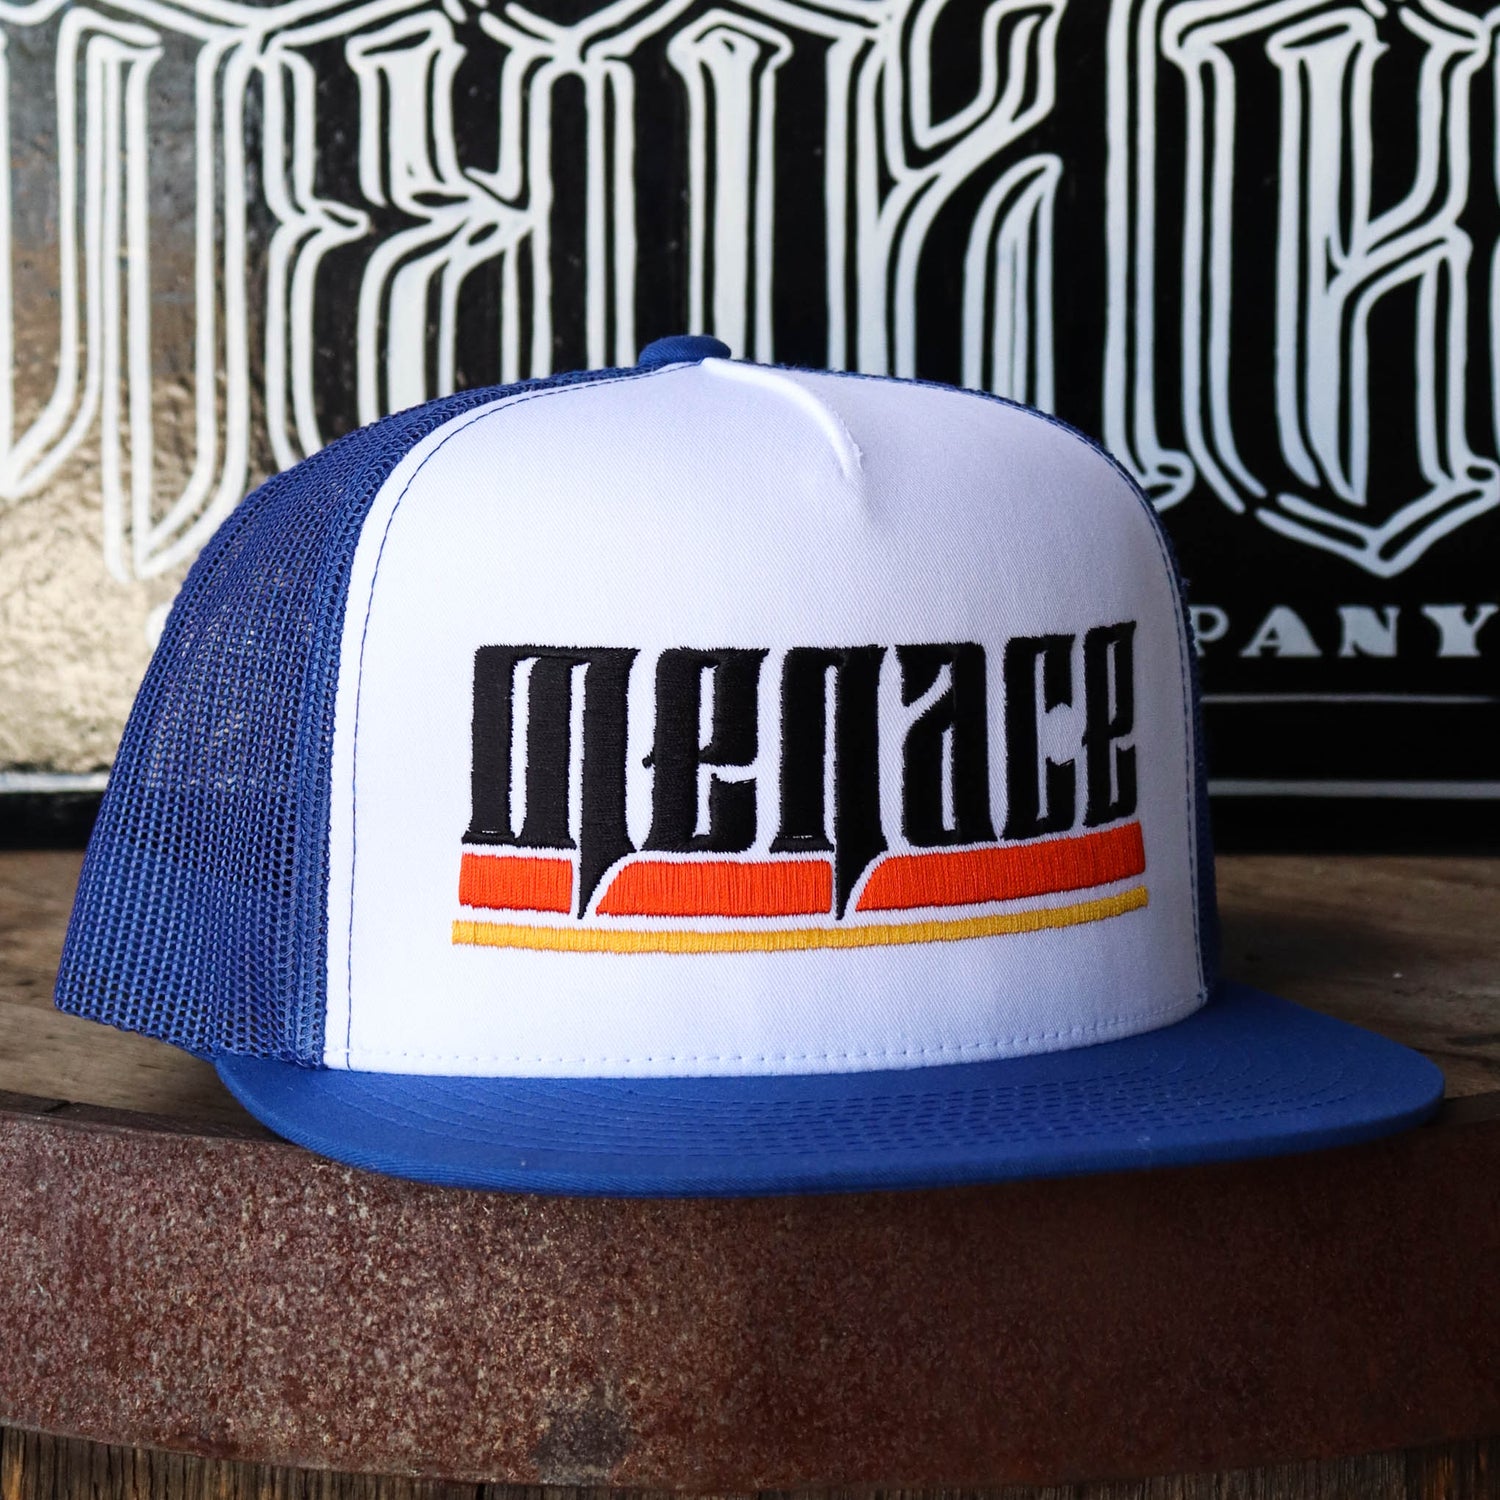 Royal blue mesh snap back hat with embroidered Menace in black, underlined by orange and yellow lines. Slightly turned to the right.